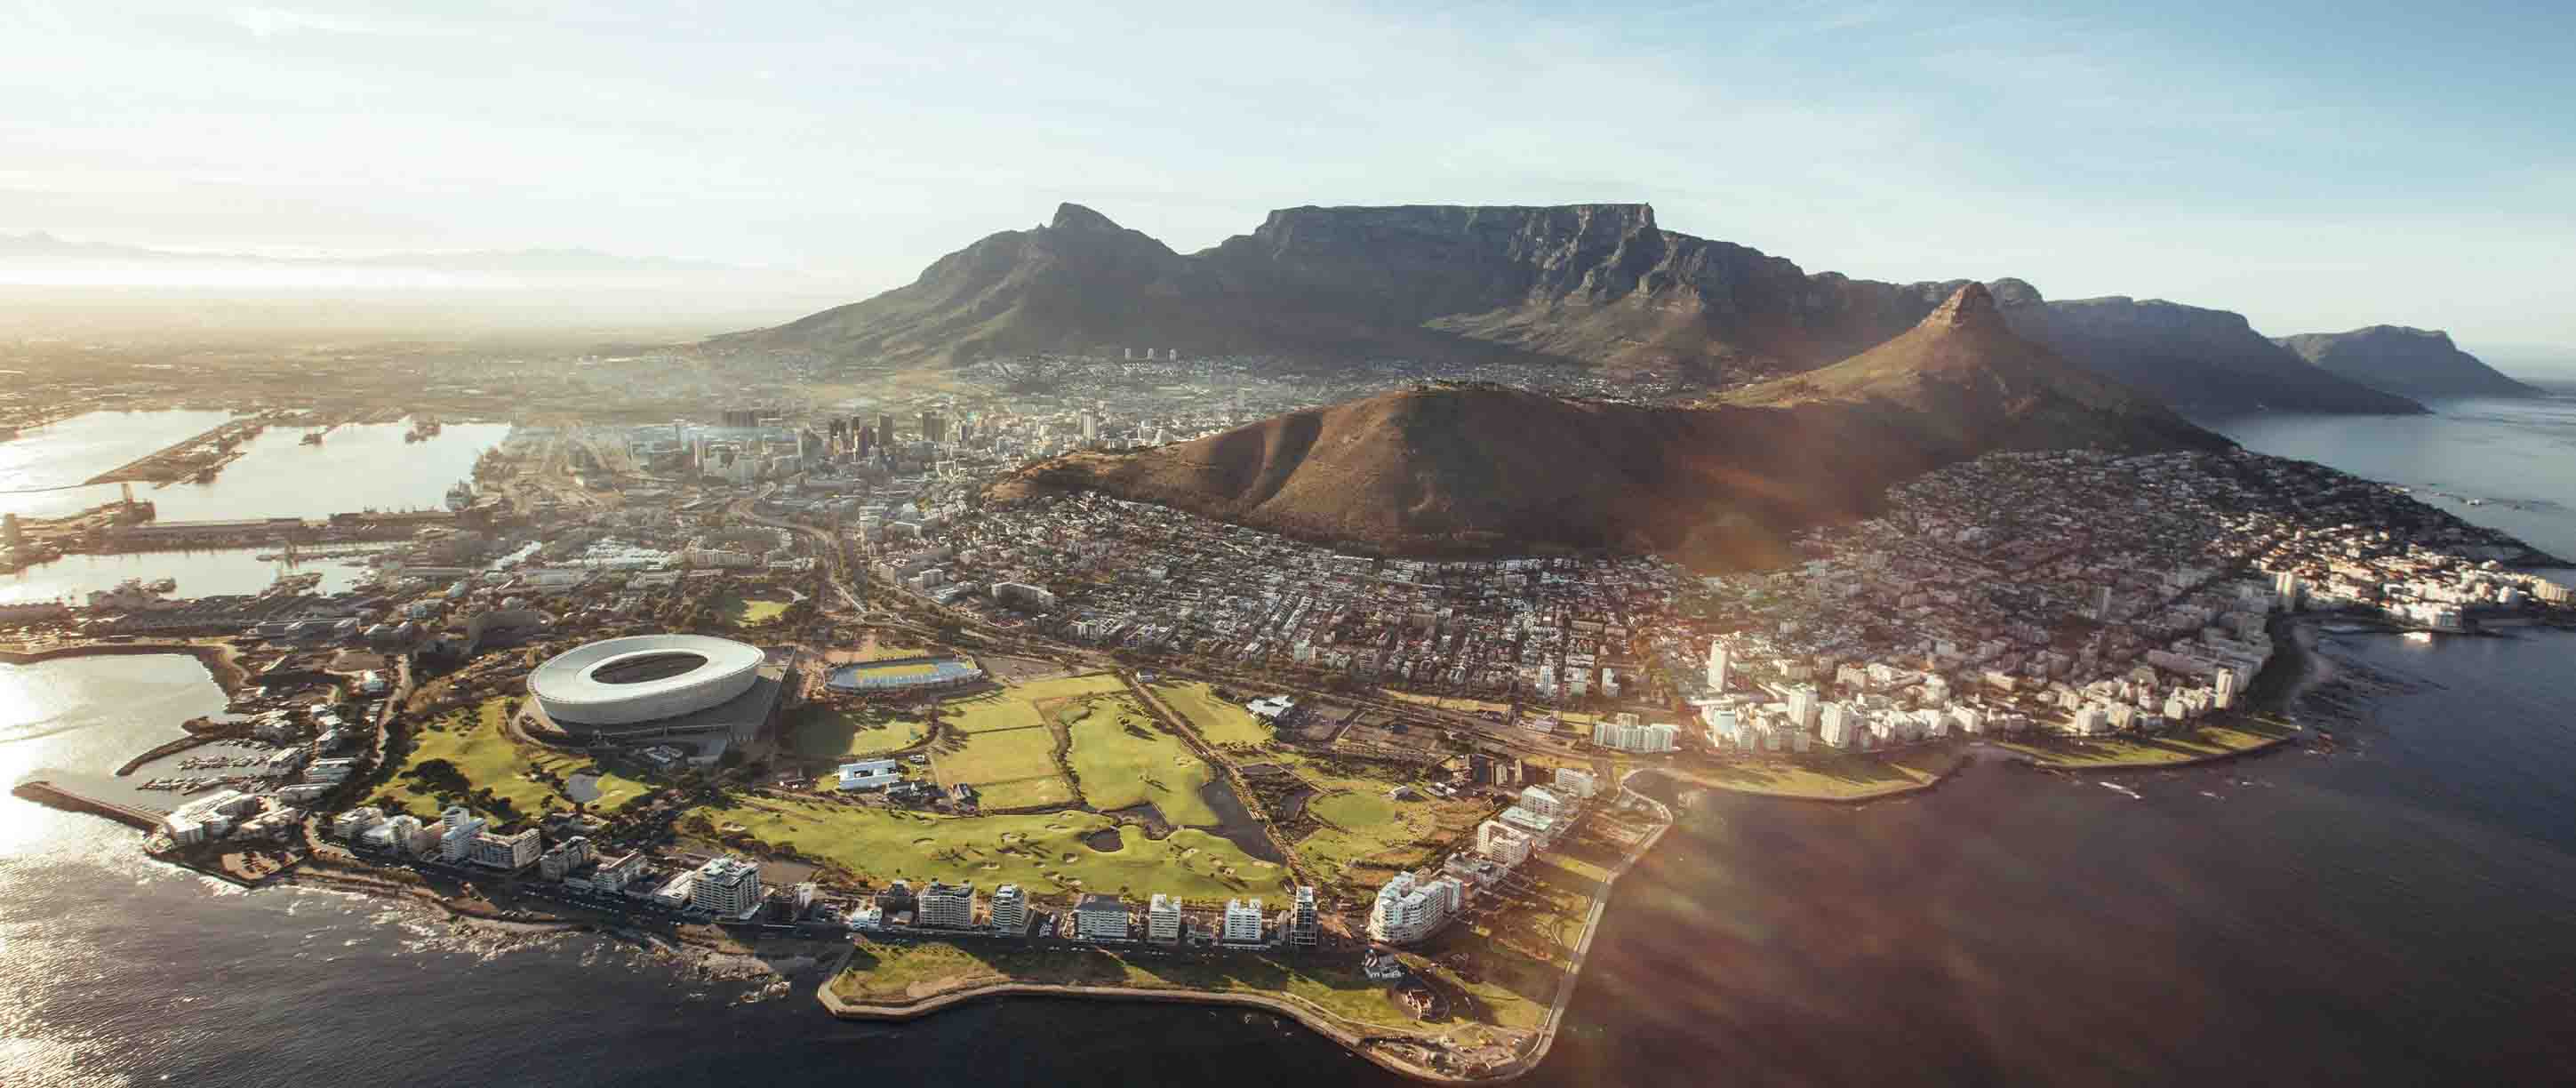 View of Cape Town city from an aerial view, with Table Mountain in the background and a clear blue sky